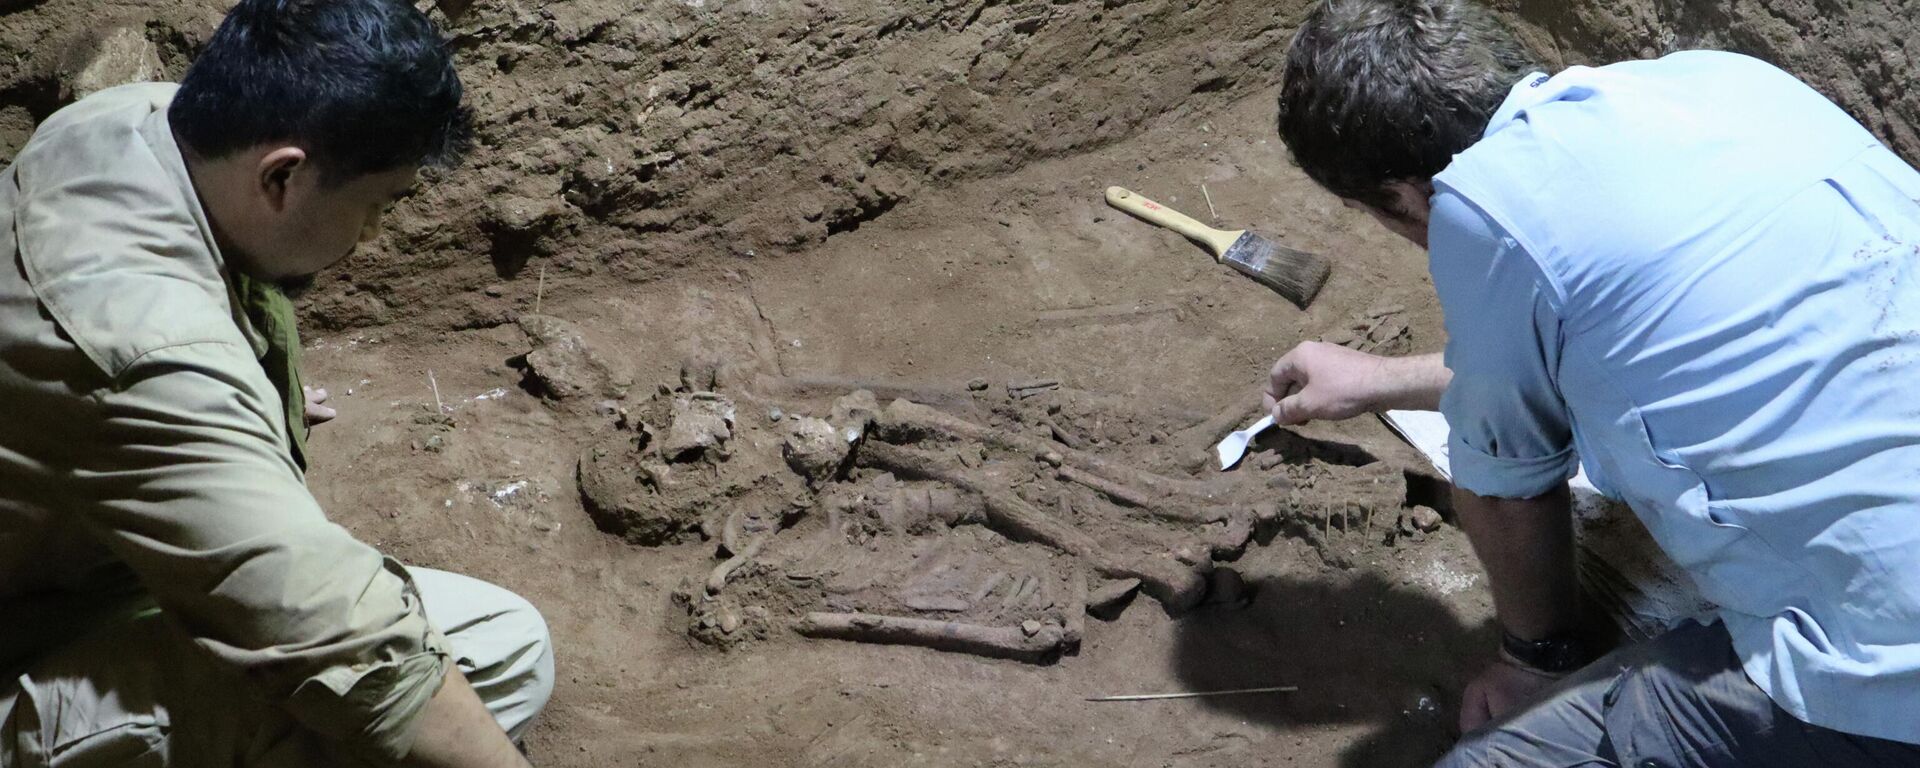 This handout photograph taken on March 1, 2020 and released by Griffith University shows scientists excavating remains dating back some 31,000 years in the Liang Tebo cave in Borneo’s East Kalimantan. - A skeleton discovered in a remote corner of Borneo rewrites the history of ancient medicine and proves amputation surgery was successfully carried out some 31,000 years ago, scientists said September 7, 2022 - Sputnik International, 1920, 08.09.2022